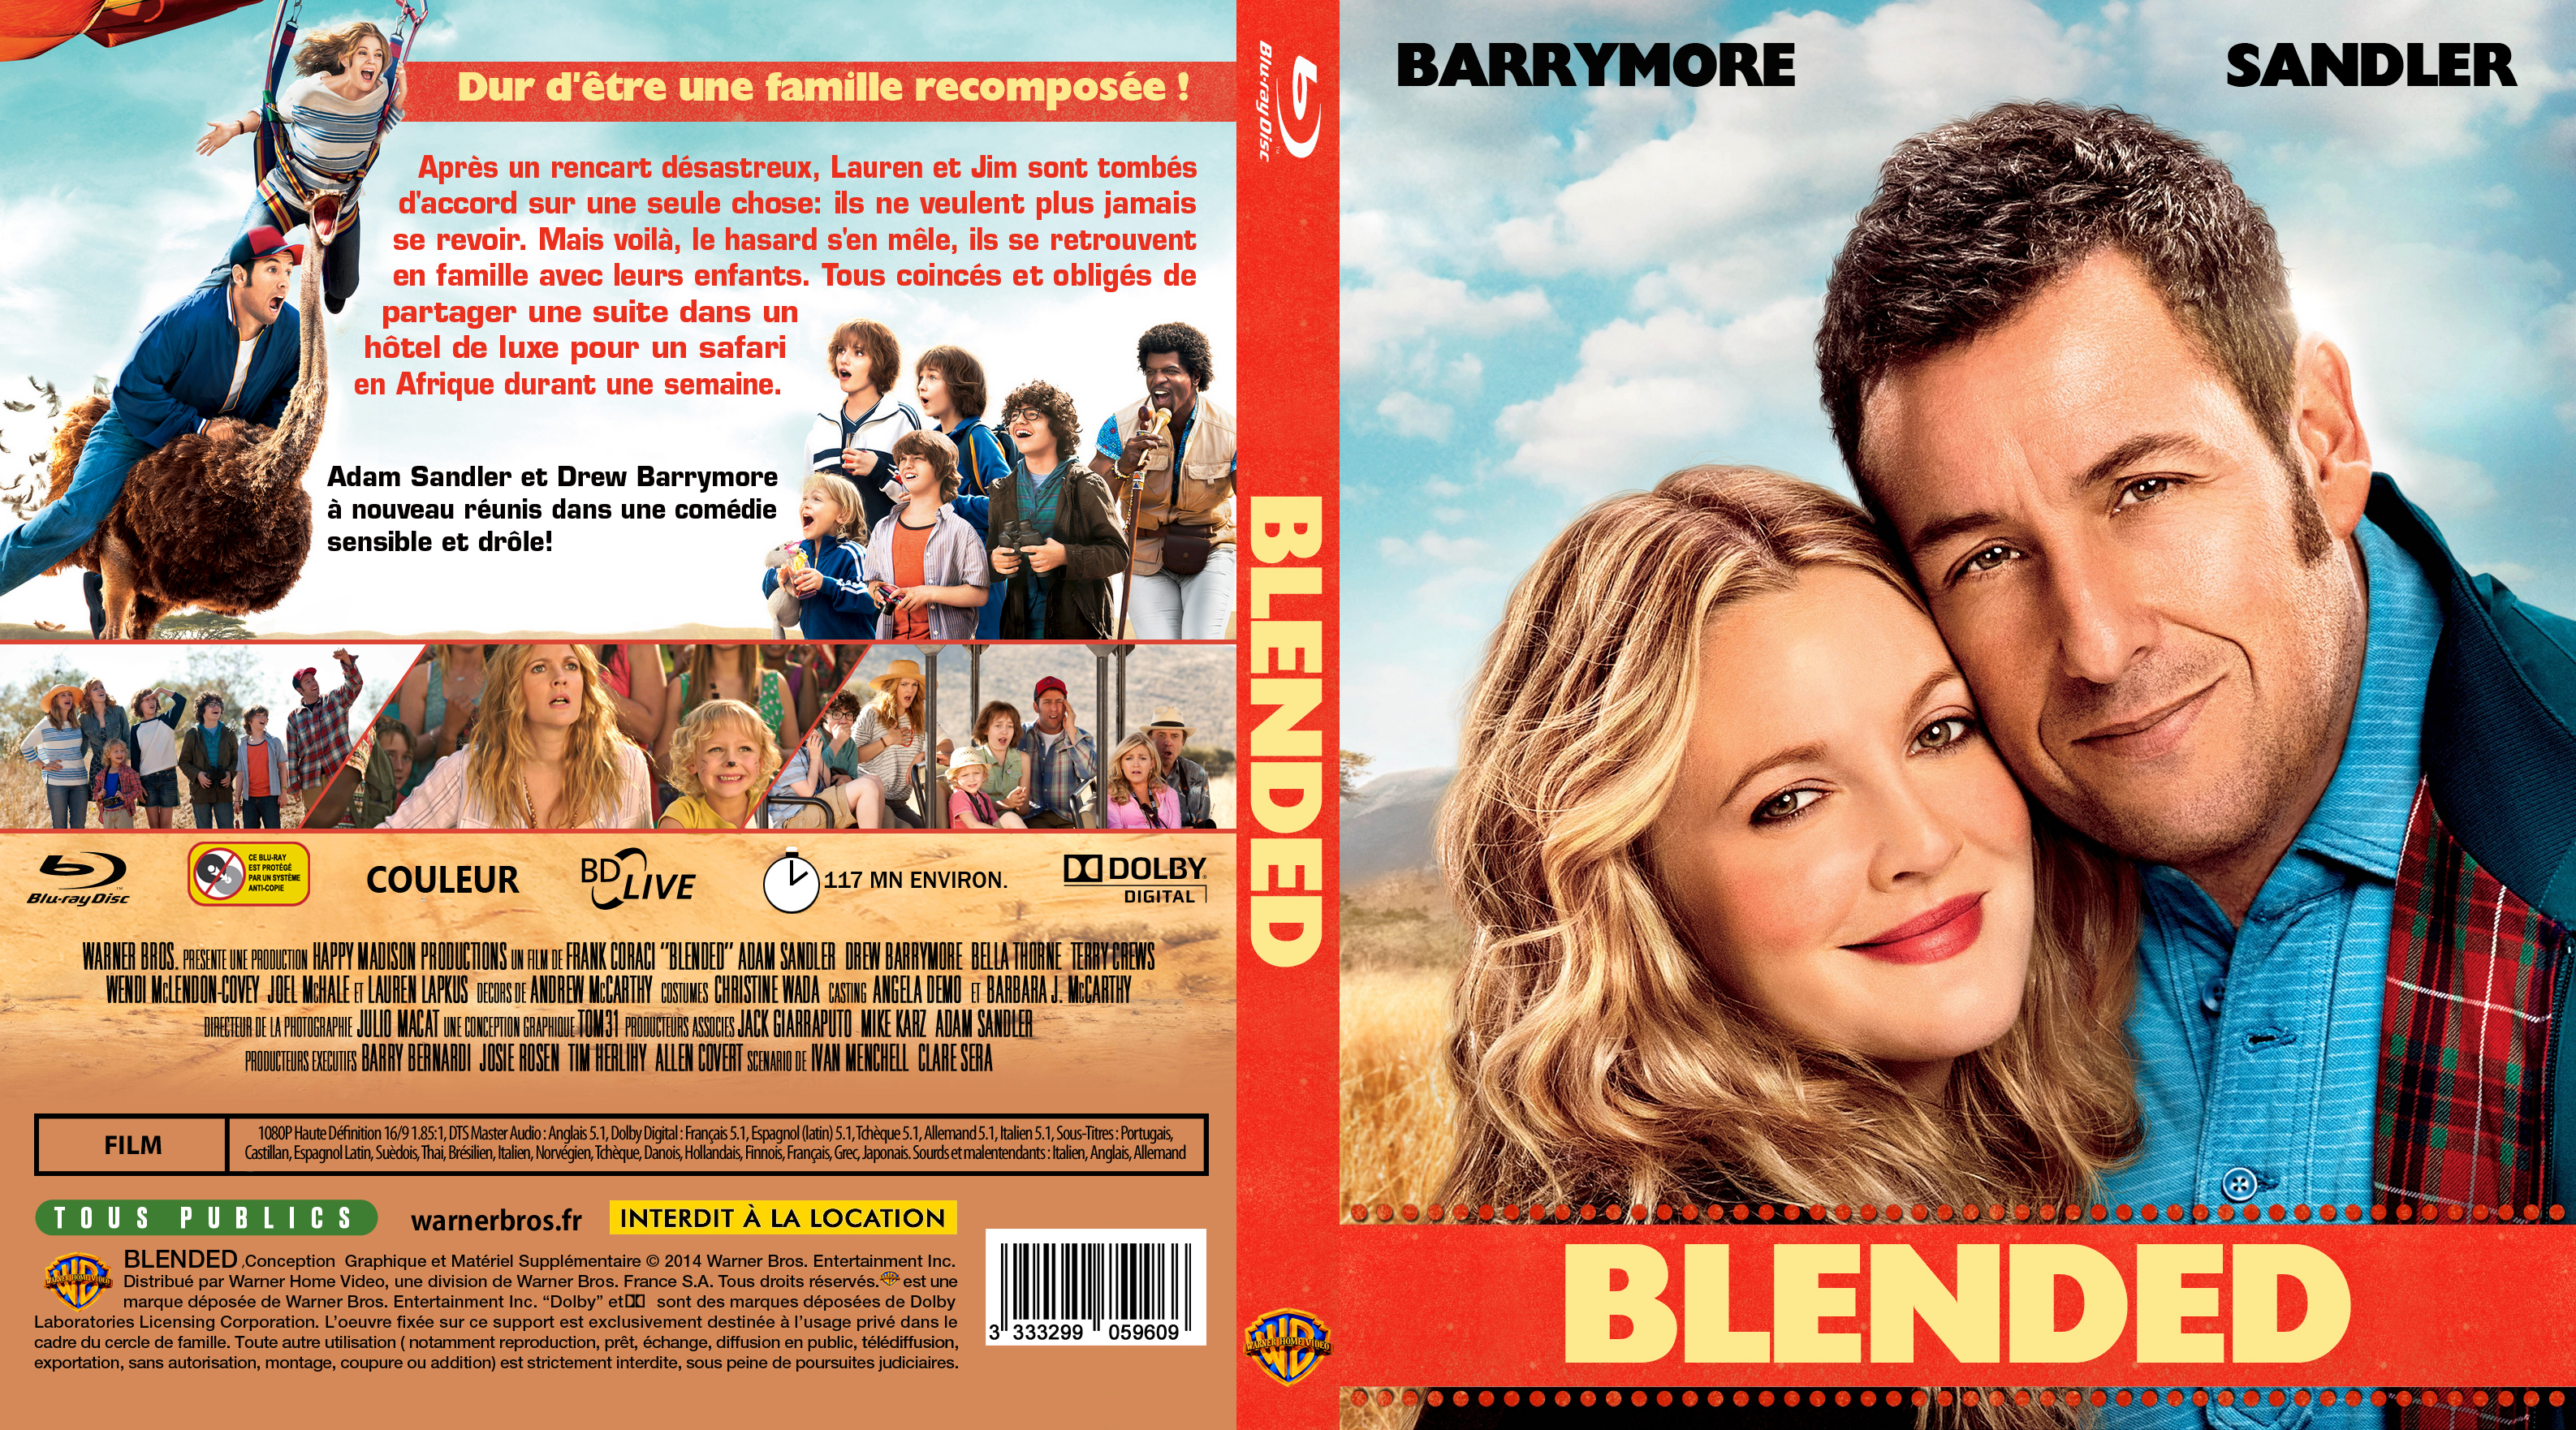 Jaquette DVD Famille recompose - Blended custom (BLU-RAY)